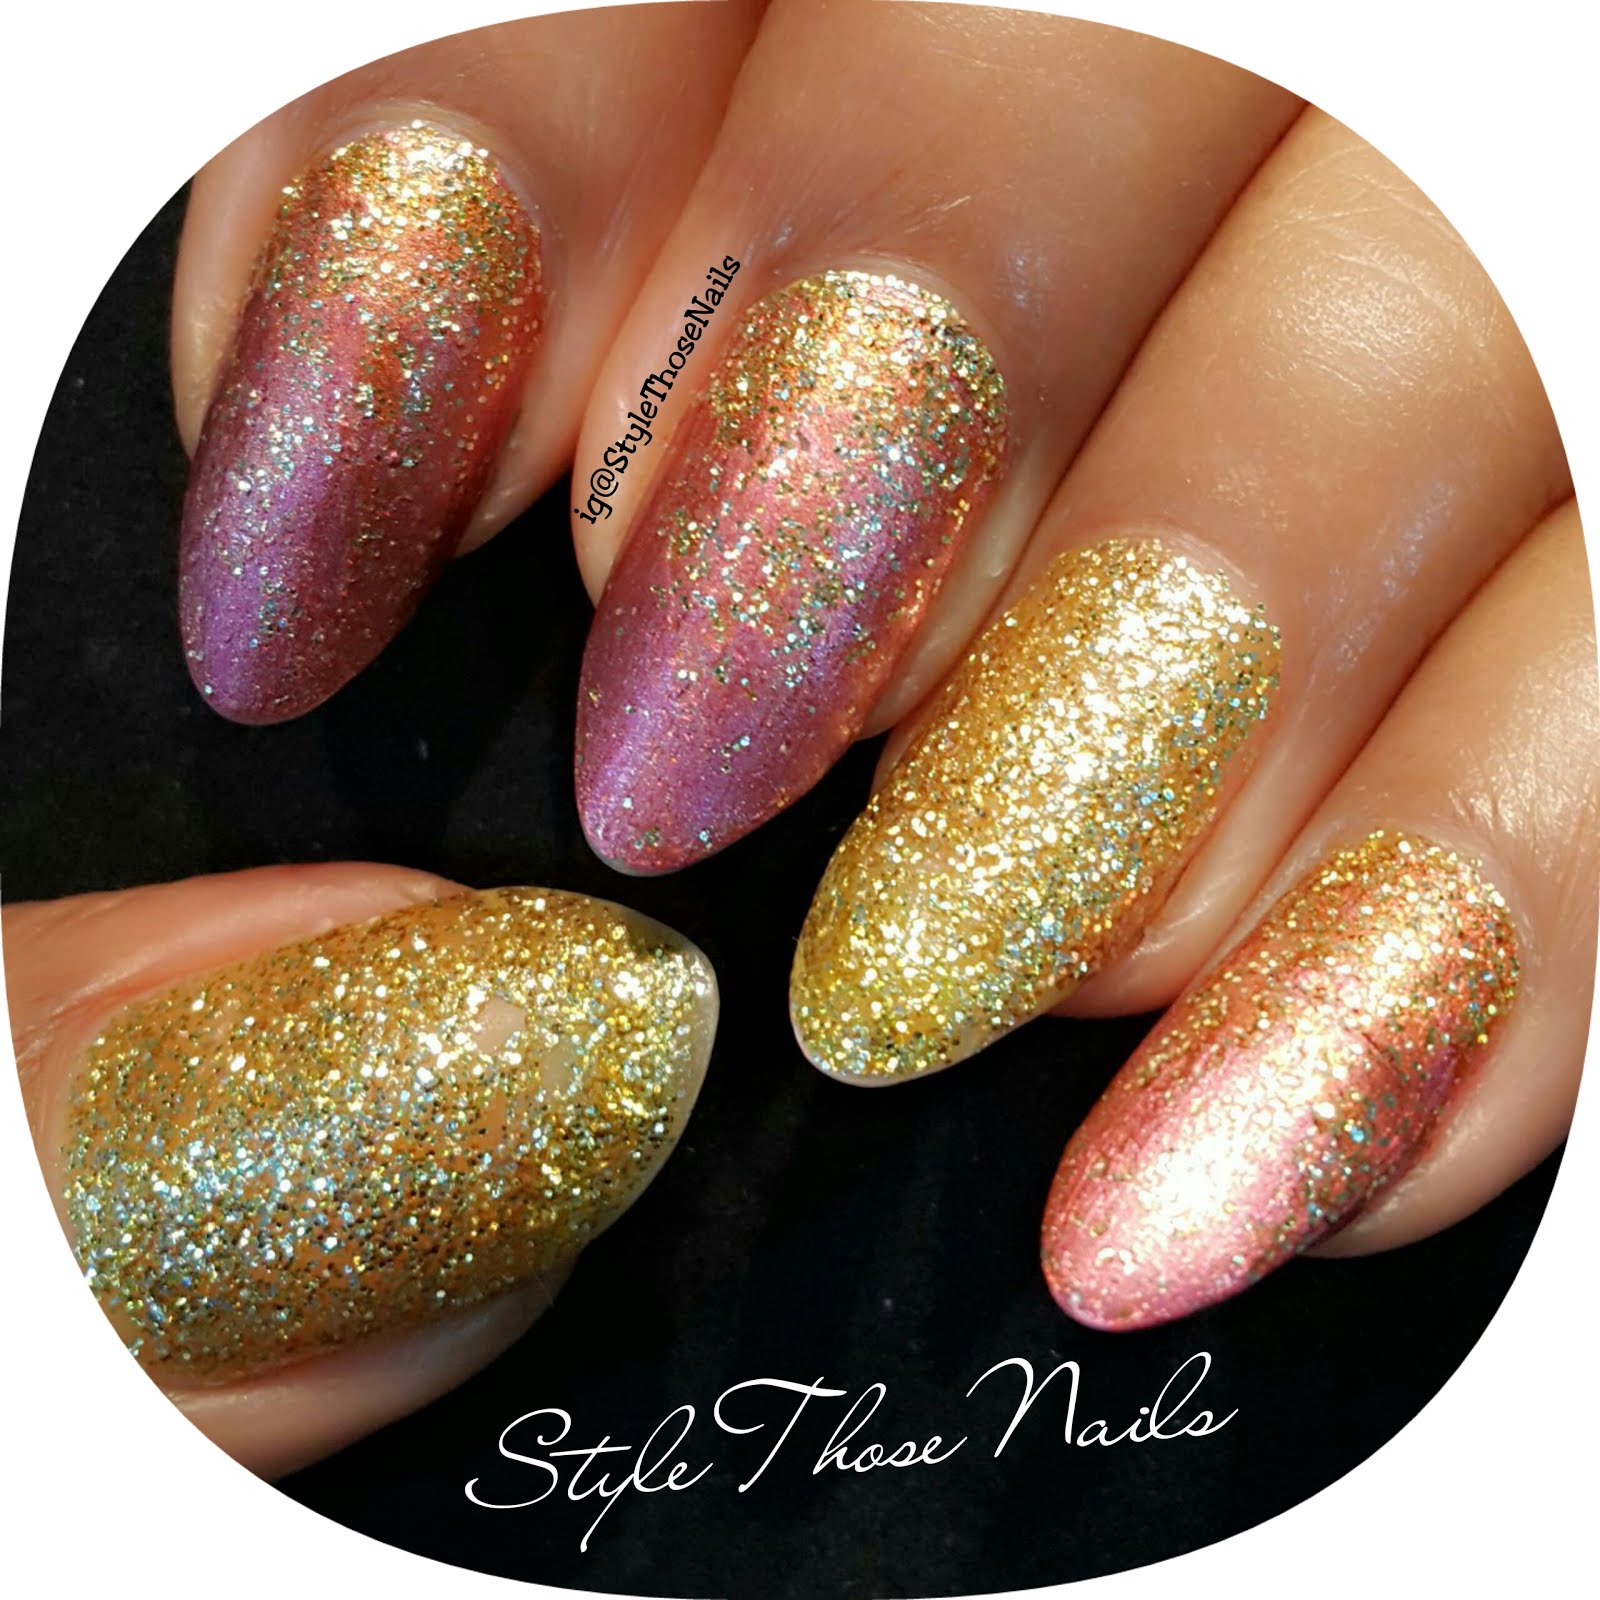 Style Those Nails: 40 Great Nail Art Ideas - Glitter Accent Nails